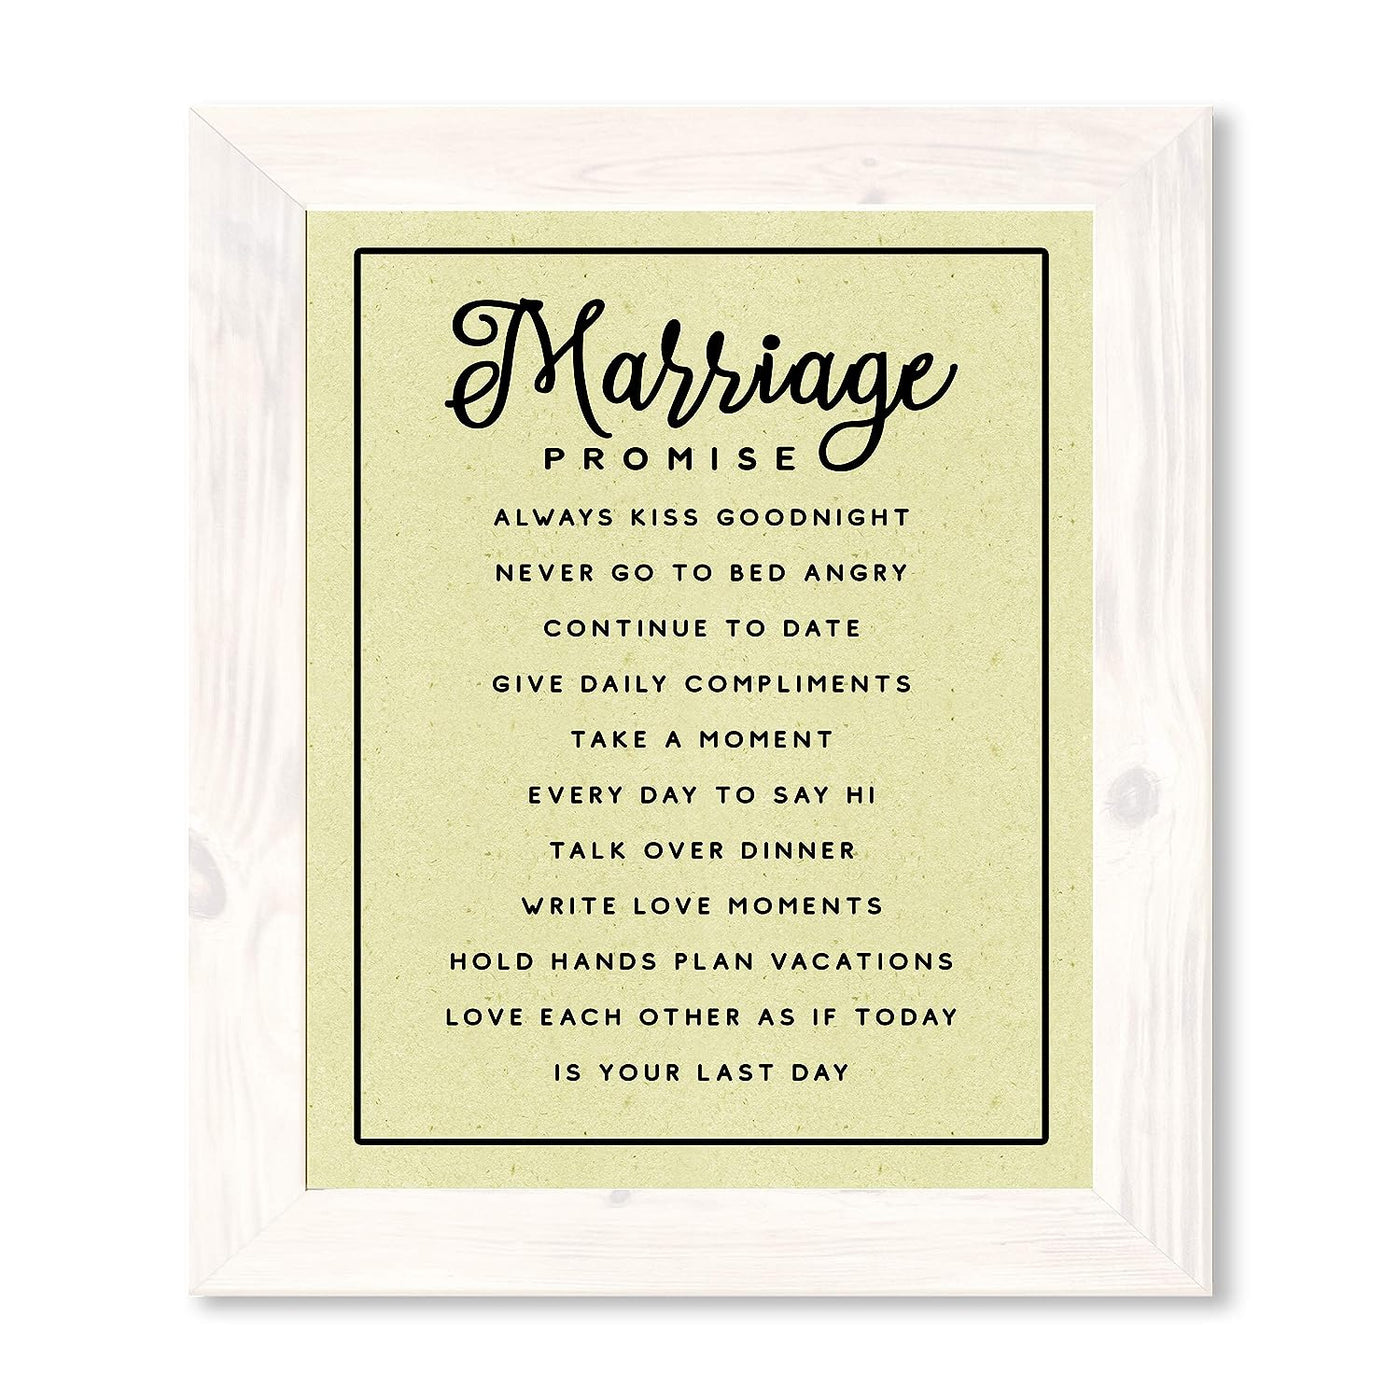 Marriage Promise-Inspirational Wall Art -11 x 14" Love & Marriage Wall Print w/Replica Parchment Design-Ready to Frame. Perfect For Spouse-Life Partners. Great Engagement-Wedding-Anniversary Gift!